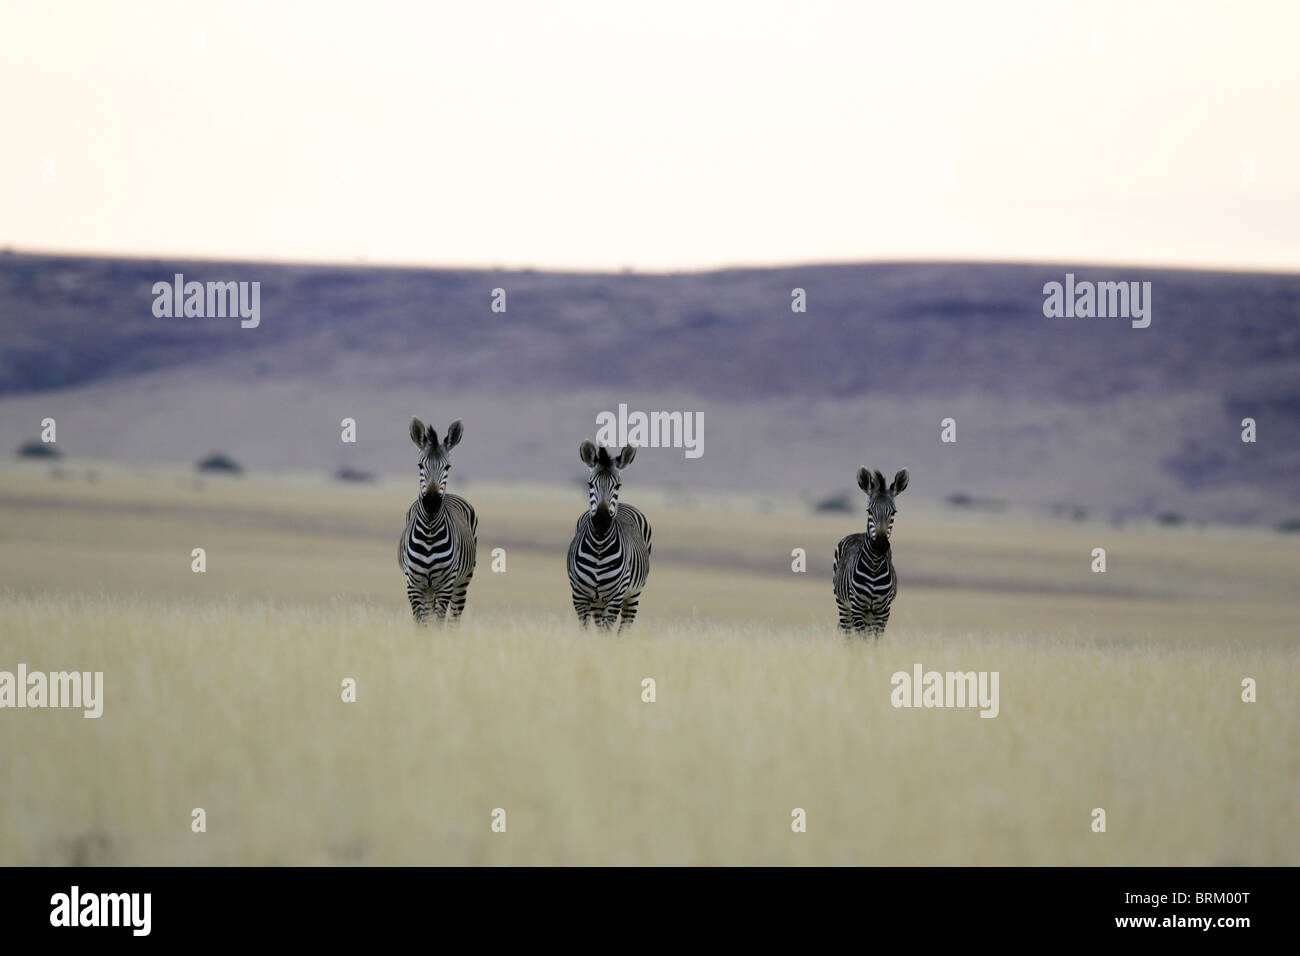 Three Zebra standing side by side facing the camera with a koppie in the background Stock Photo